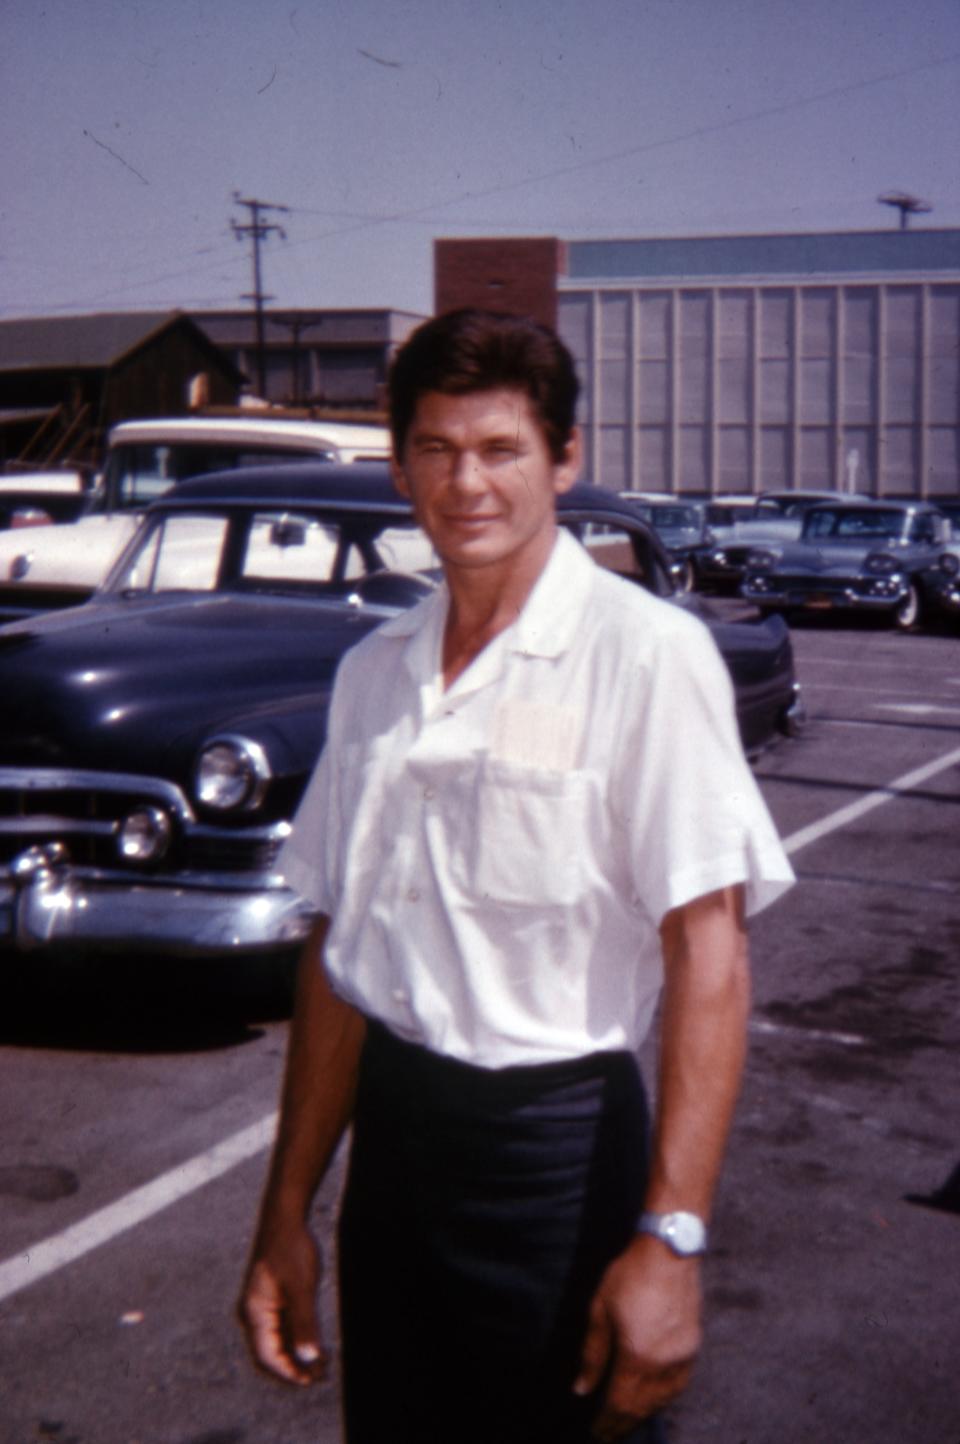 Charles Bronson stops for a photograph in a parking lot, possibly for the Hollywood unemployment office at 6725 Santa Monica Blvd.